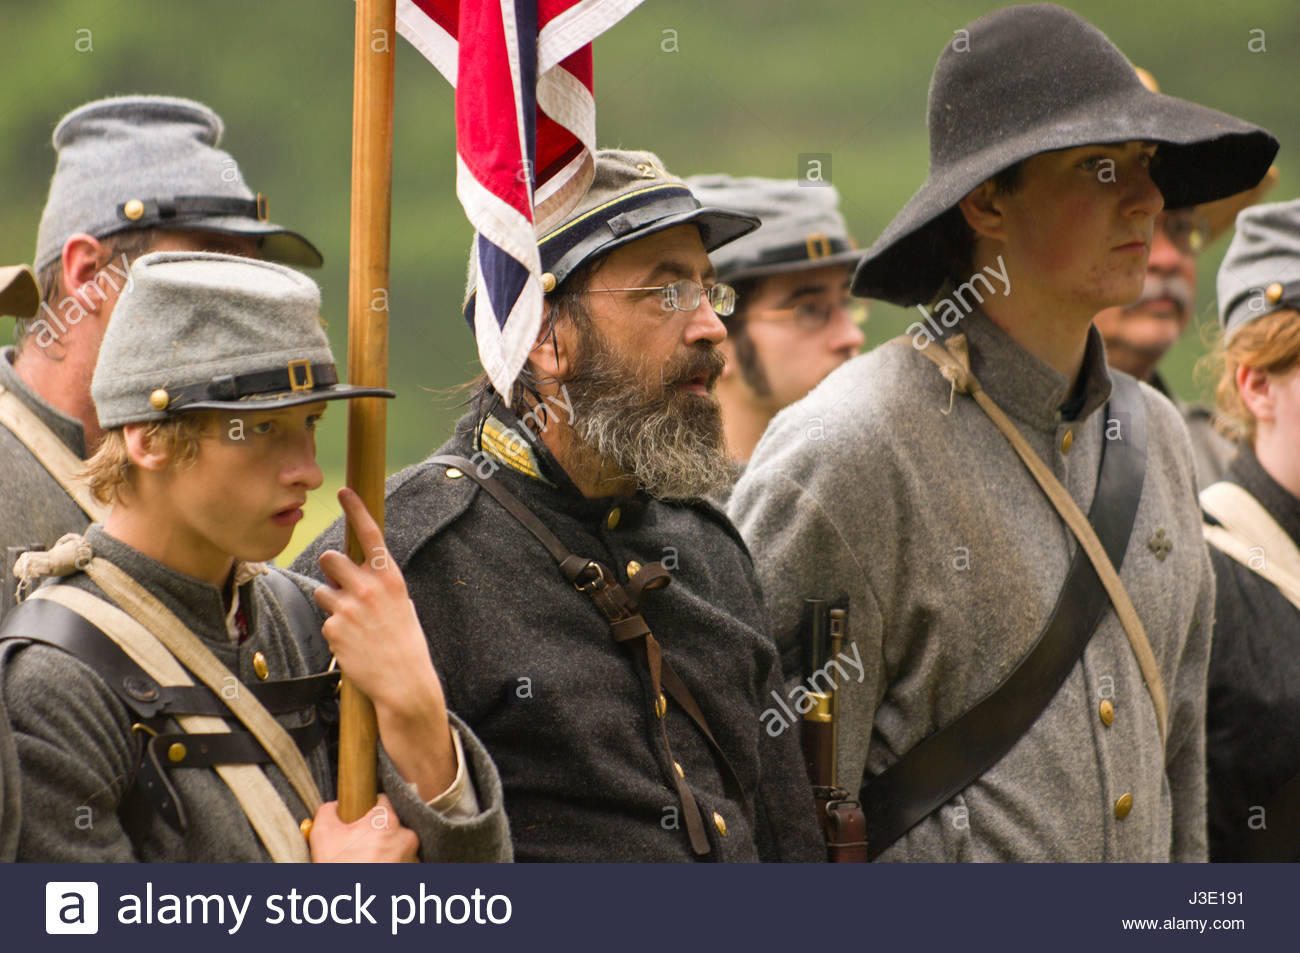 confederate-soldiers-in-line-after-mock-